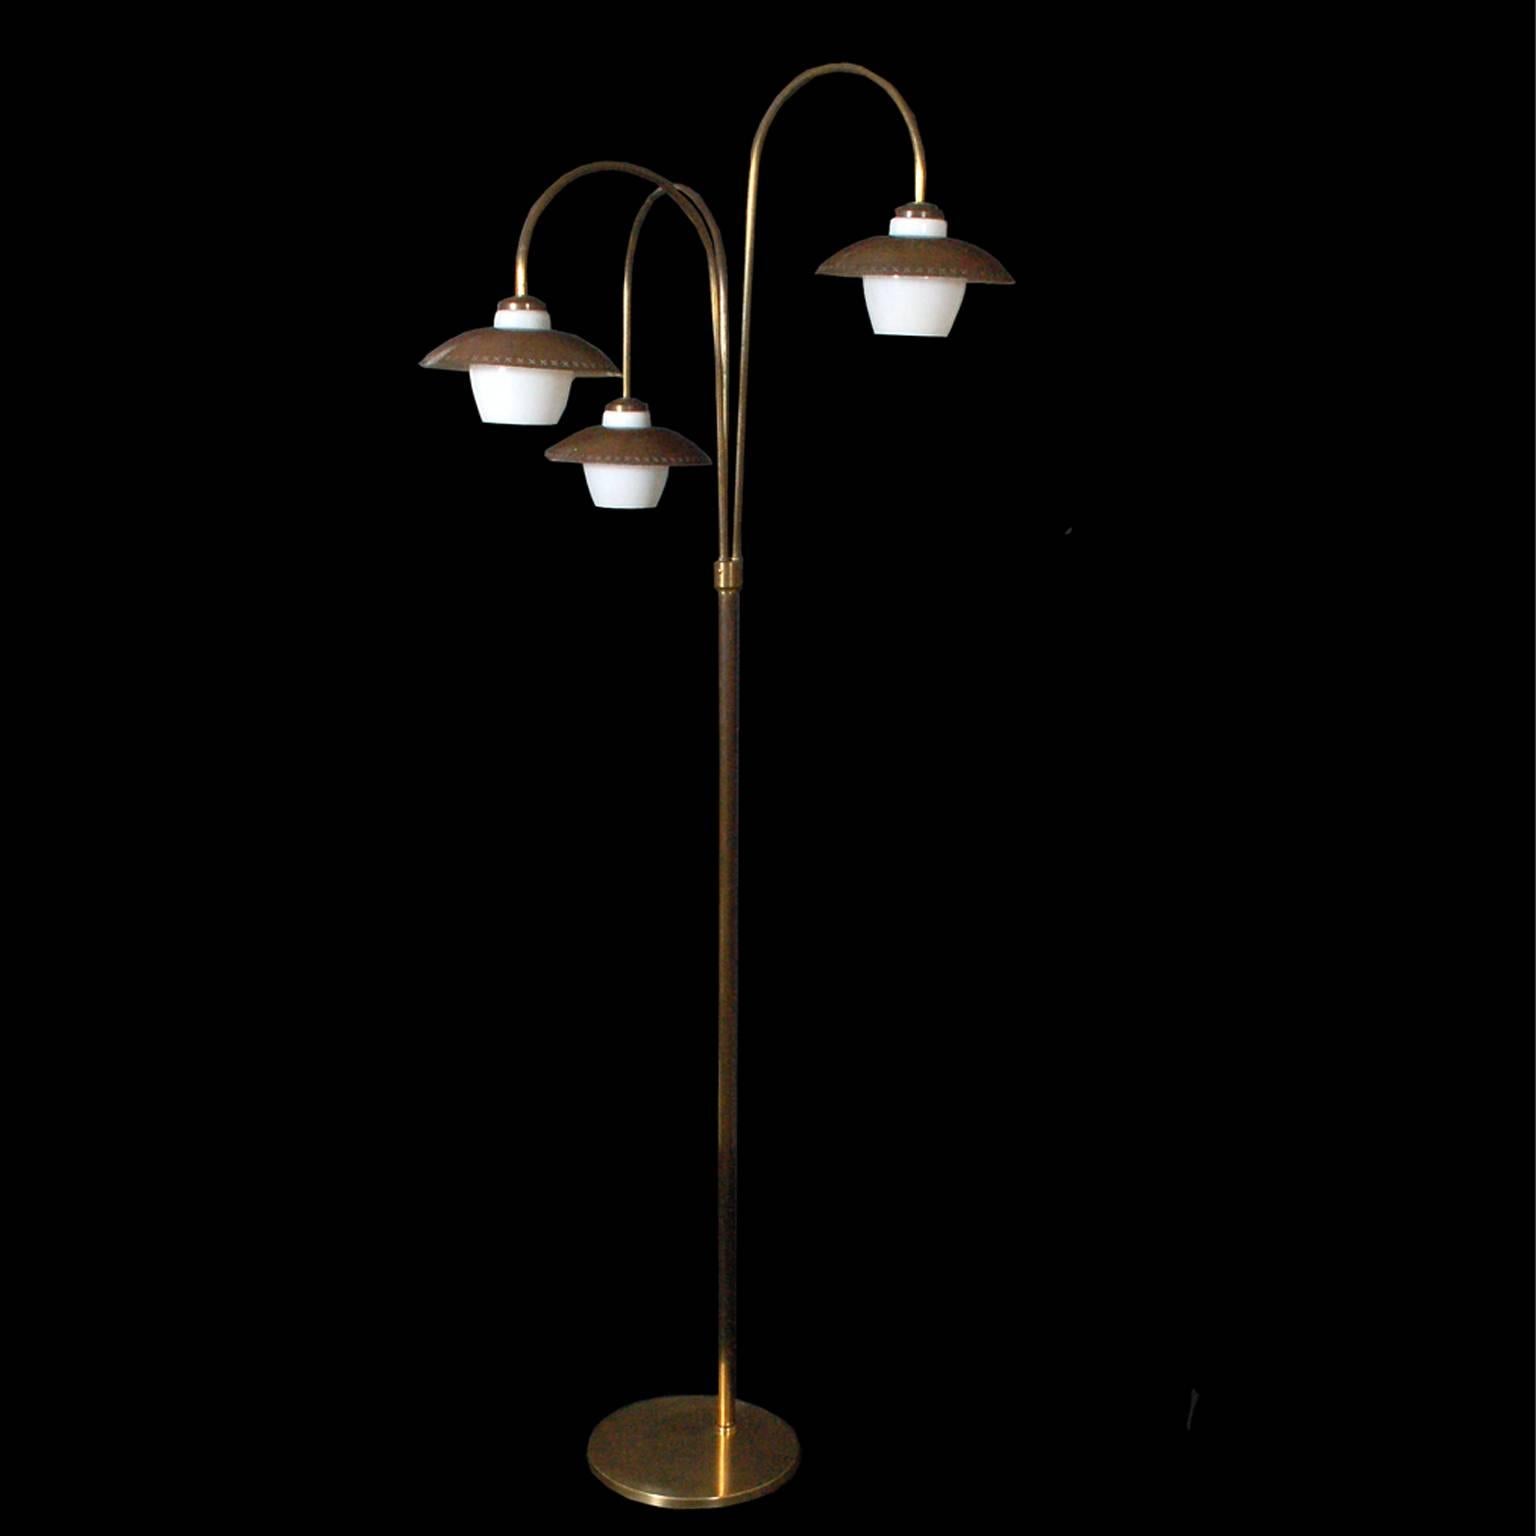 Patinated brass, glass shades, three-arm floor lamp in the shape of flowers.
                     